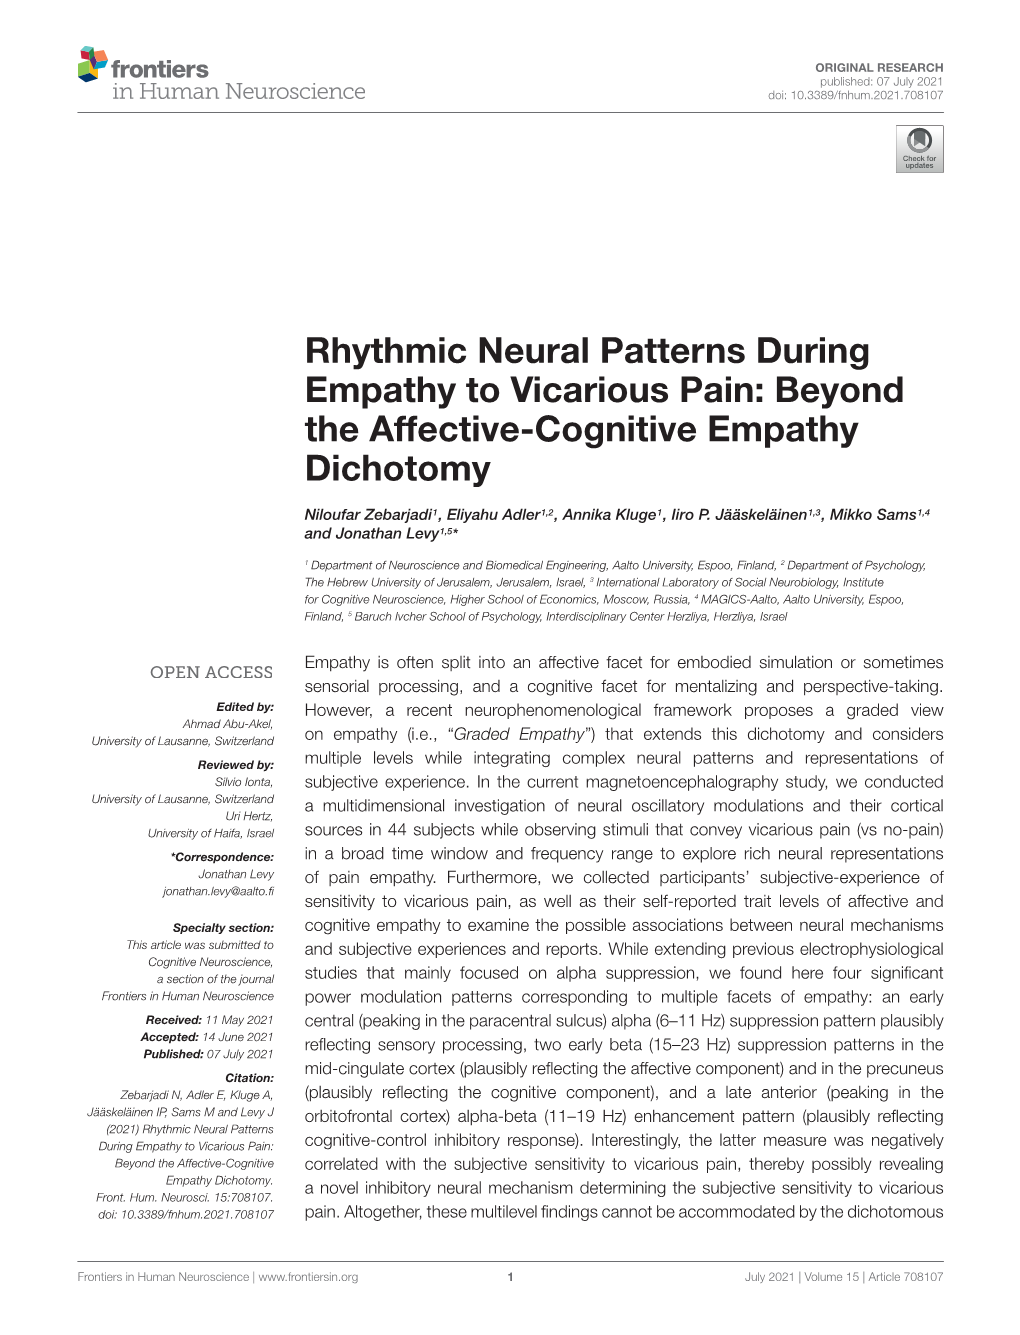 Rhythmic Neural Patterns During Empathy to Vicarious Pain: Beyond the Affective-Cognitive Empathy Dichotomy